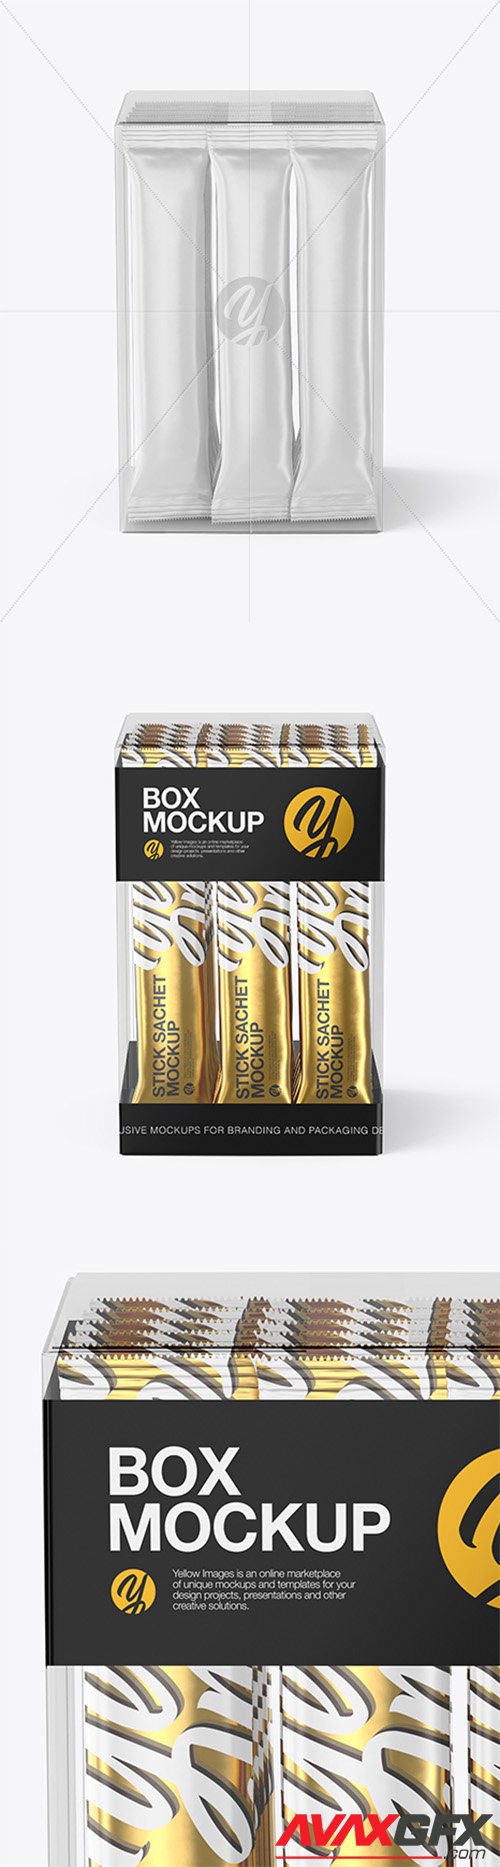 Download Box W 18 Sachets Mockup 38122 Avaxgfx All Downloads That You Need In One Place Graphic From Nitroflare Rapidgator PSD Mockup Templates